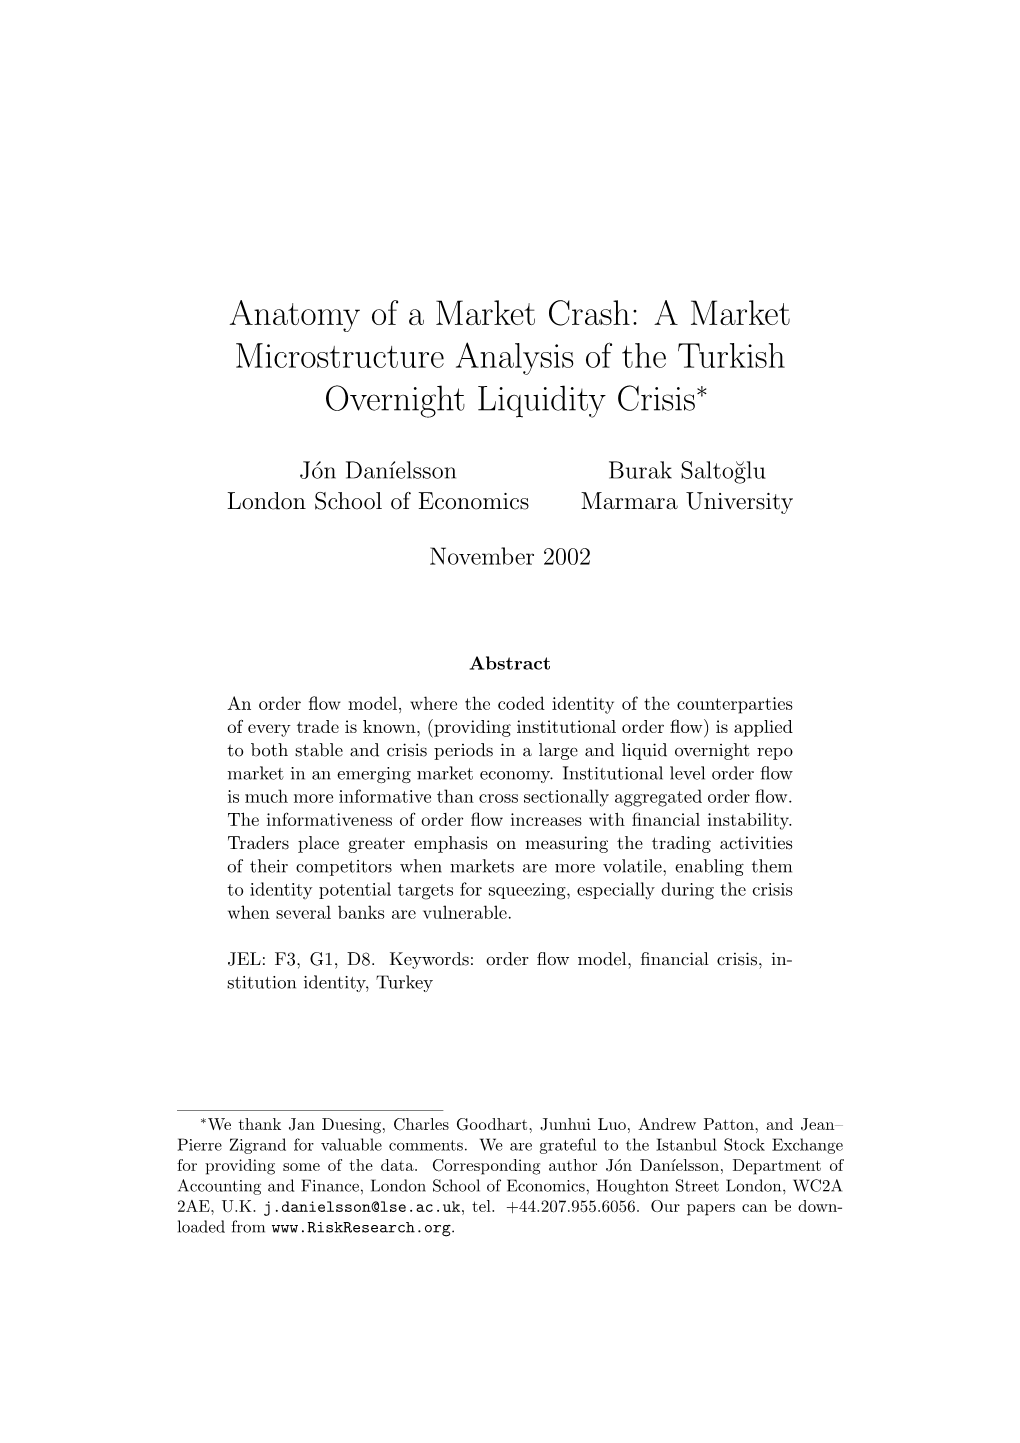 Anatomy of a Market Crash: a Market Microstructure Analysis of the Turkish Overnight Liquidity Crisis∗